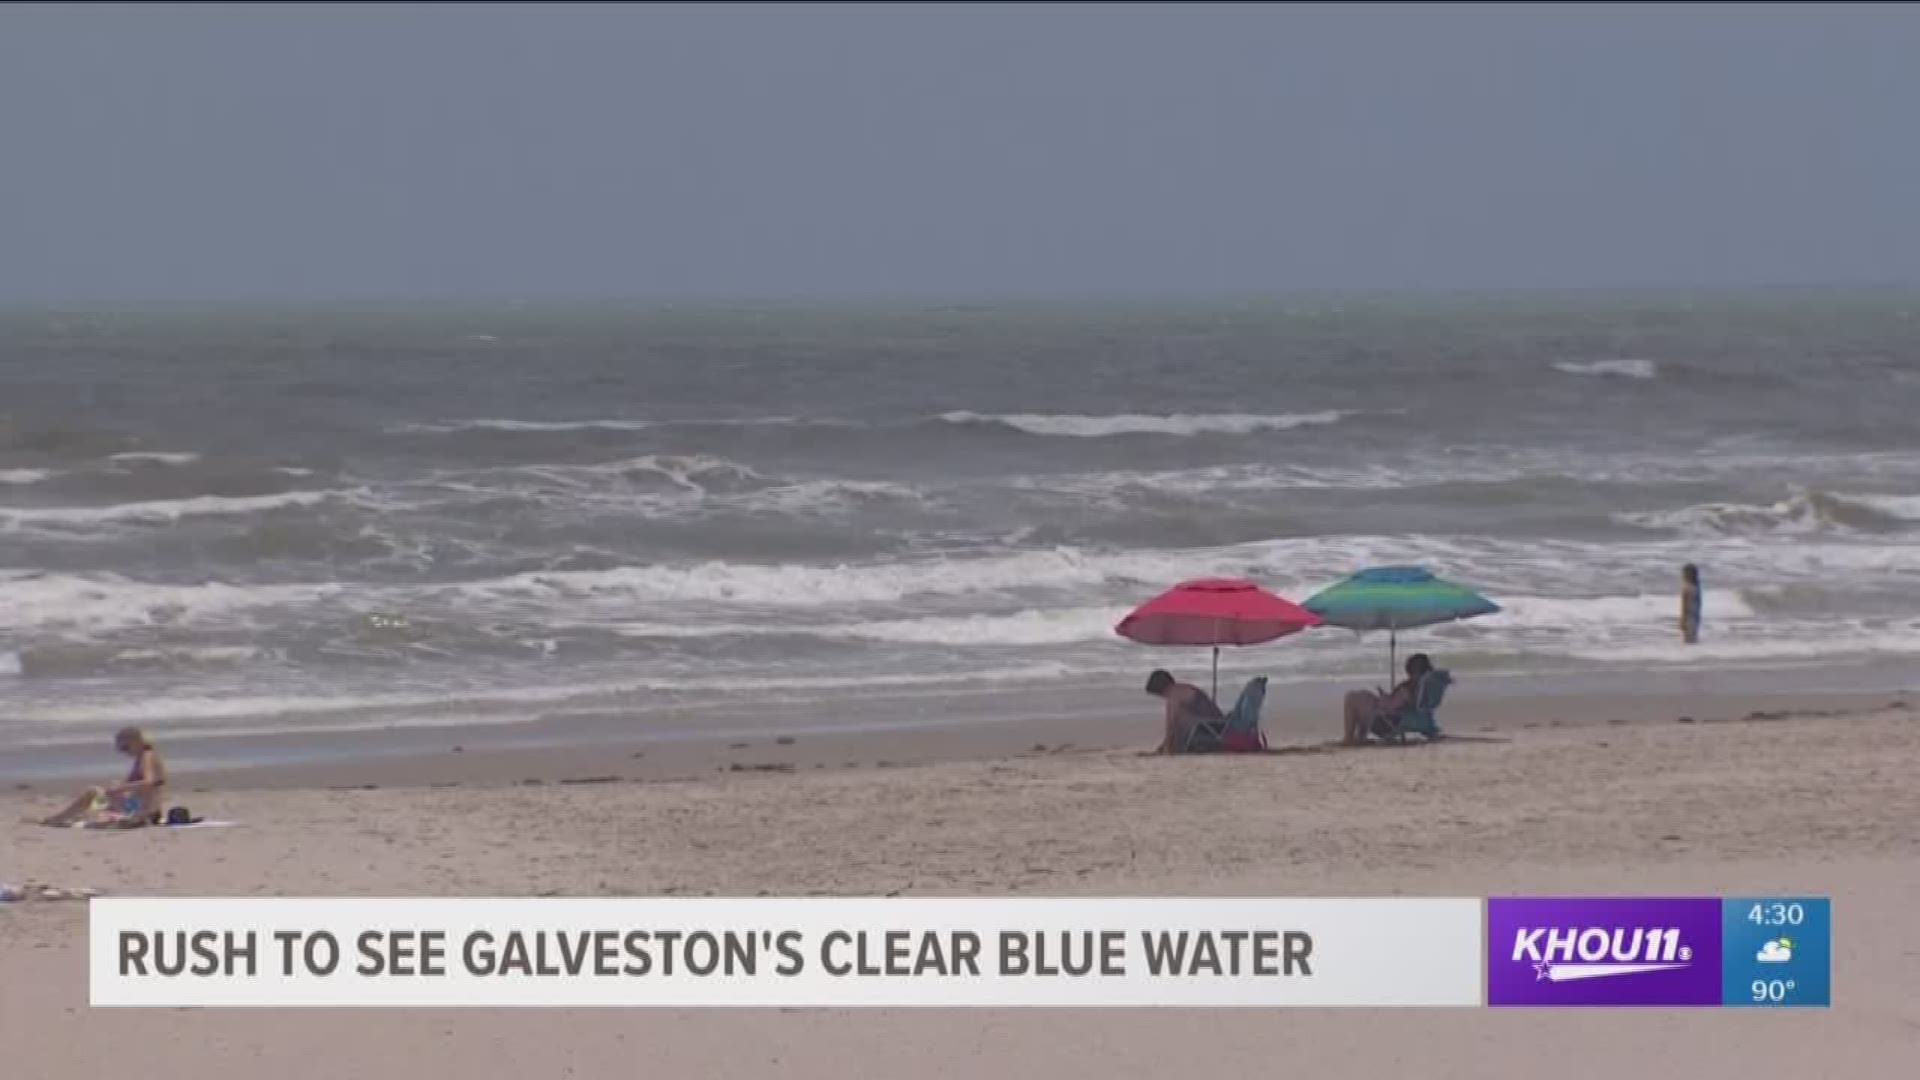 Why Some Beaches Have Clear Blue Water and Others Are Gray